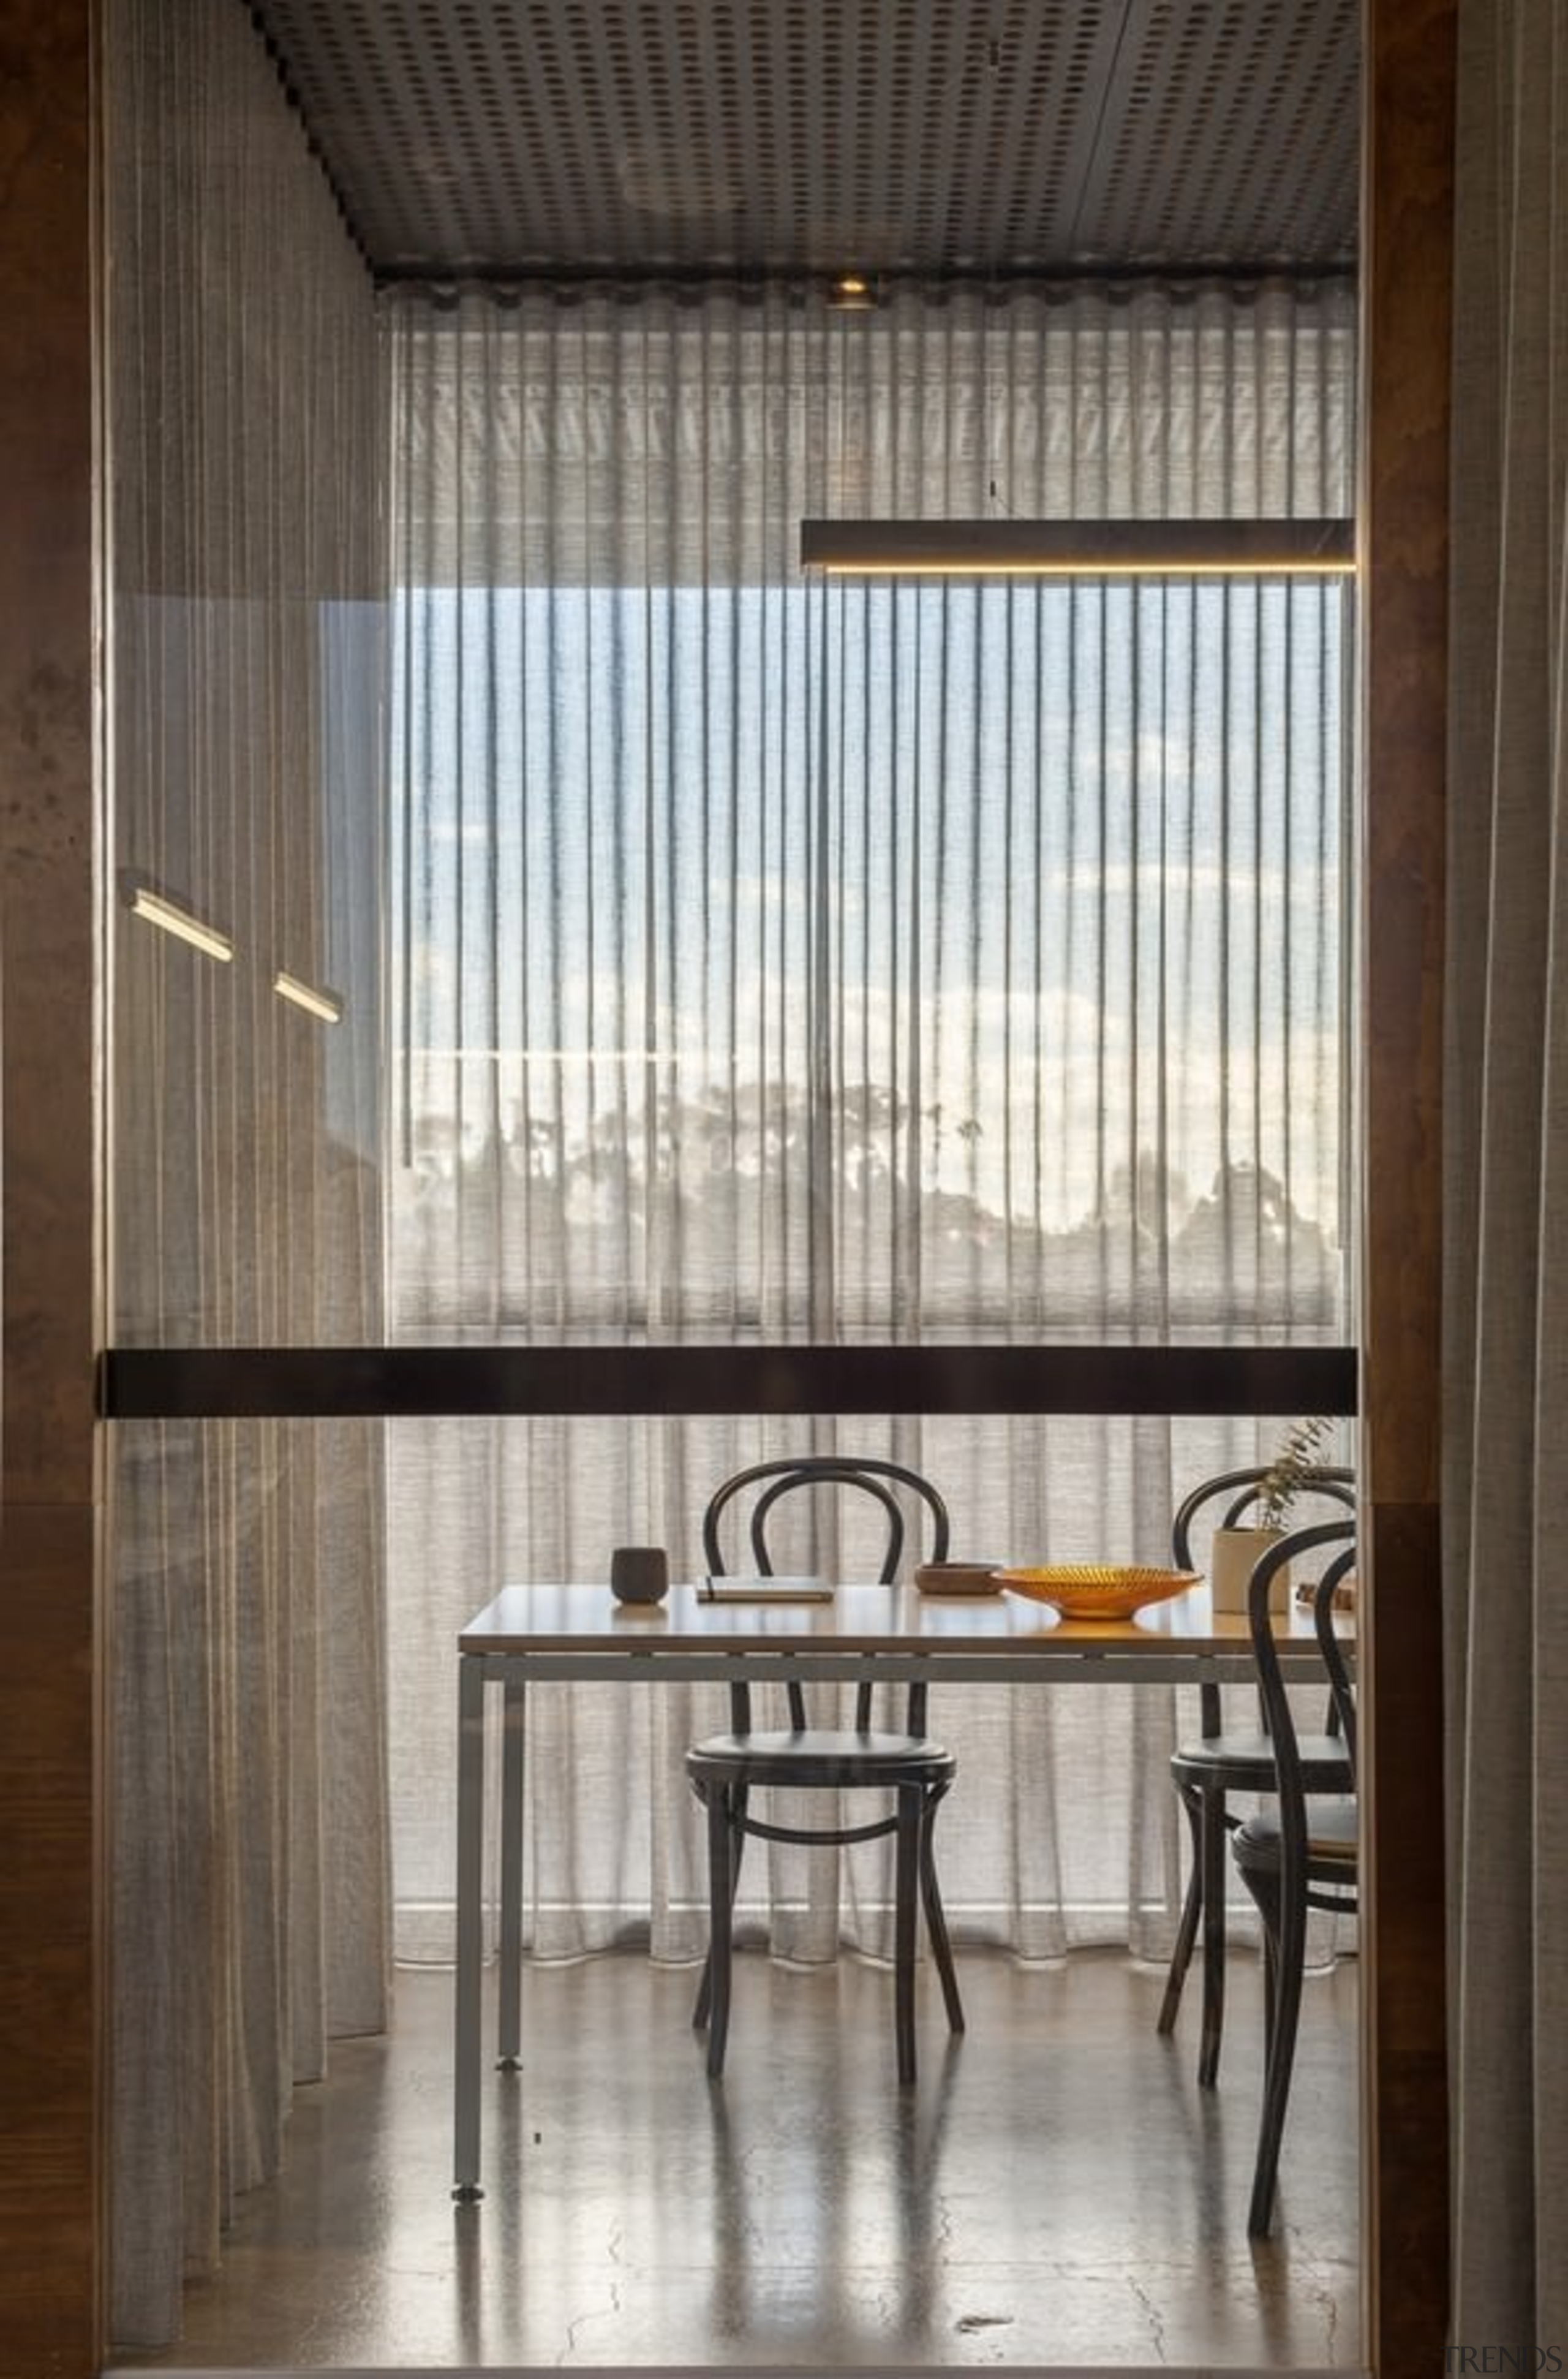 Translucent curtains filter the light in this dining architecture, ceiling, daylighting, interior design, lobby, wall, window, window covering, gray, black